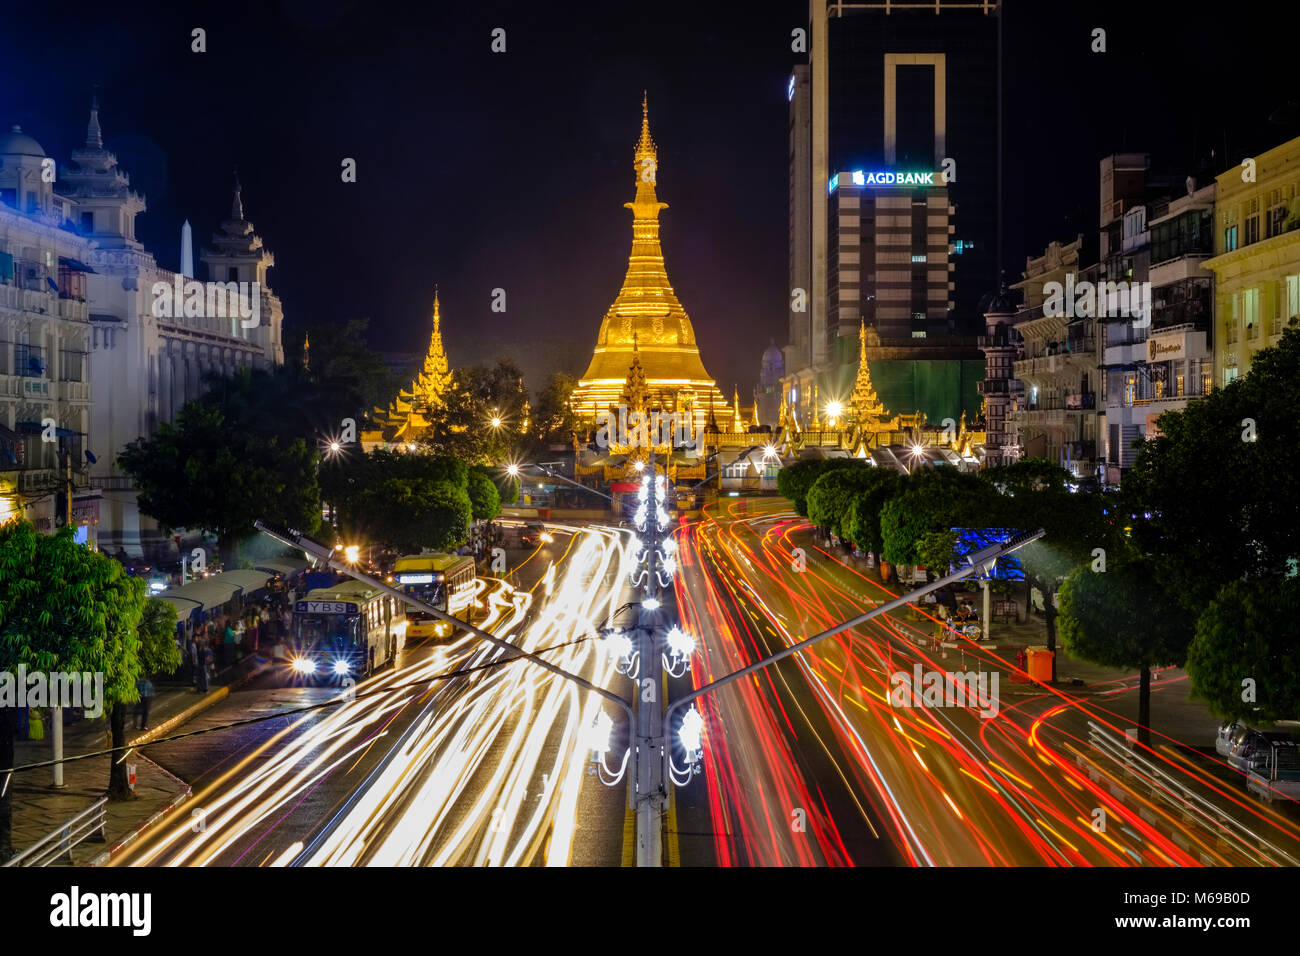 The golden Sule pagoda, one of the big pagodas, is located in the centre of town and illuminated at night Stock Photo